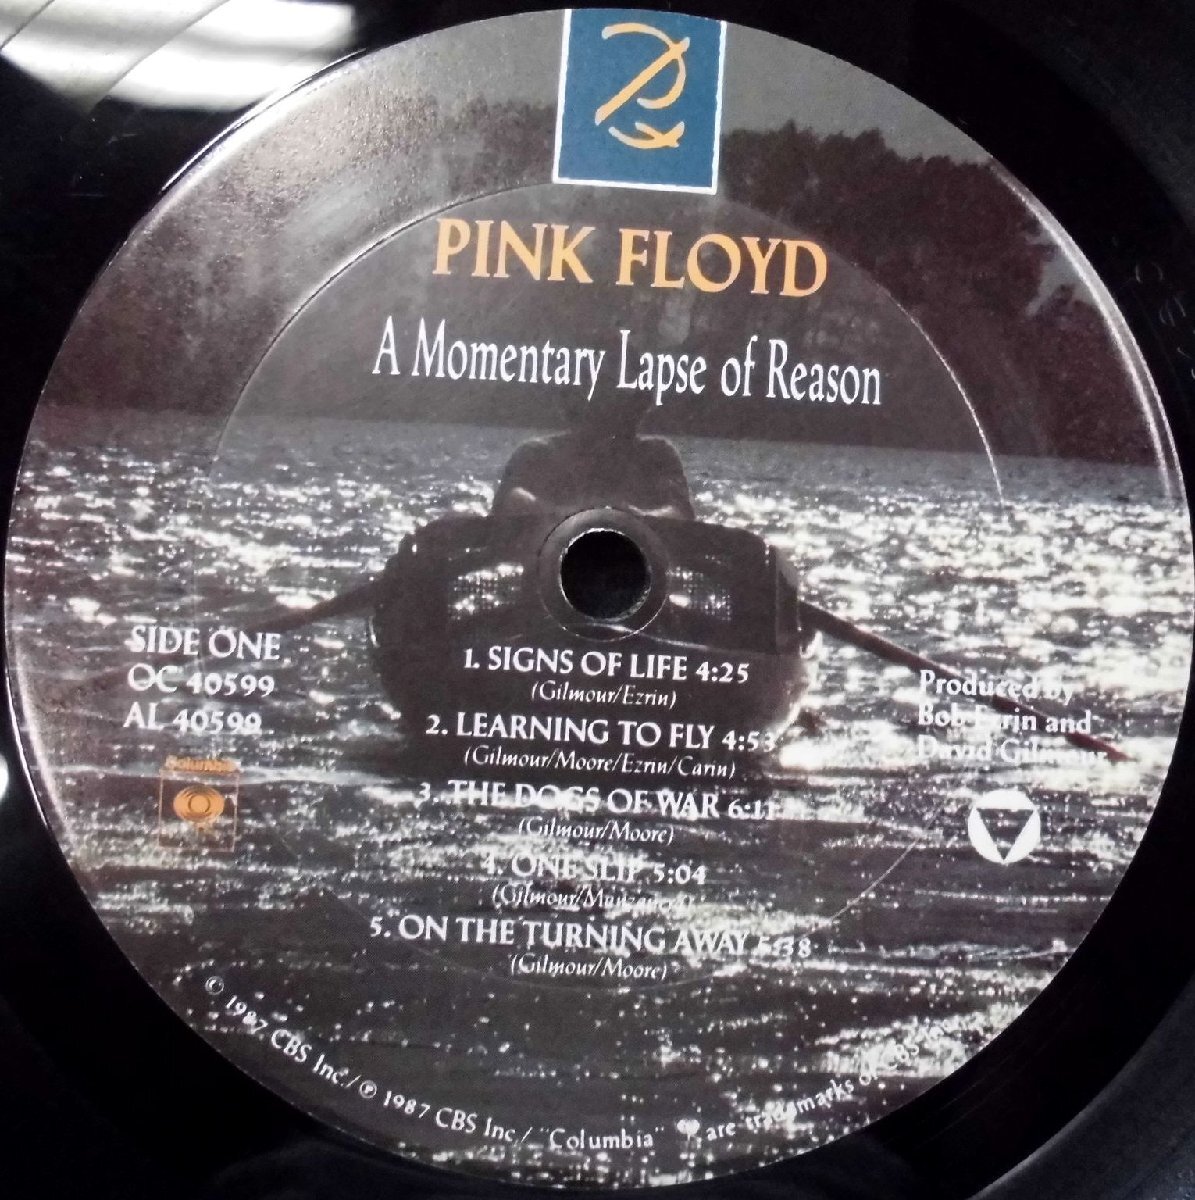 ●US-Columbiaオリジナル””w/HypeSticker,1A:1A,DMM-Cutting Copy!!”” Pink Floyd / A Momentary Lapse Of Reasonの画像8